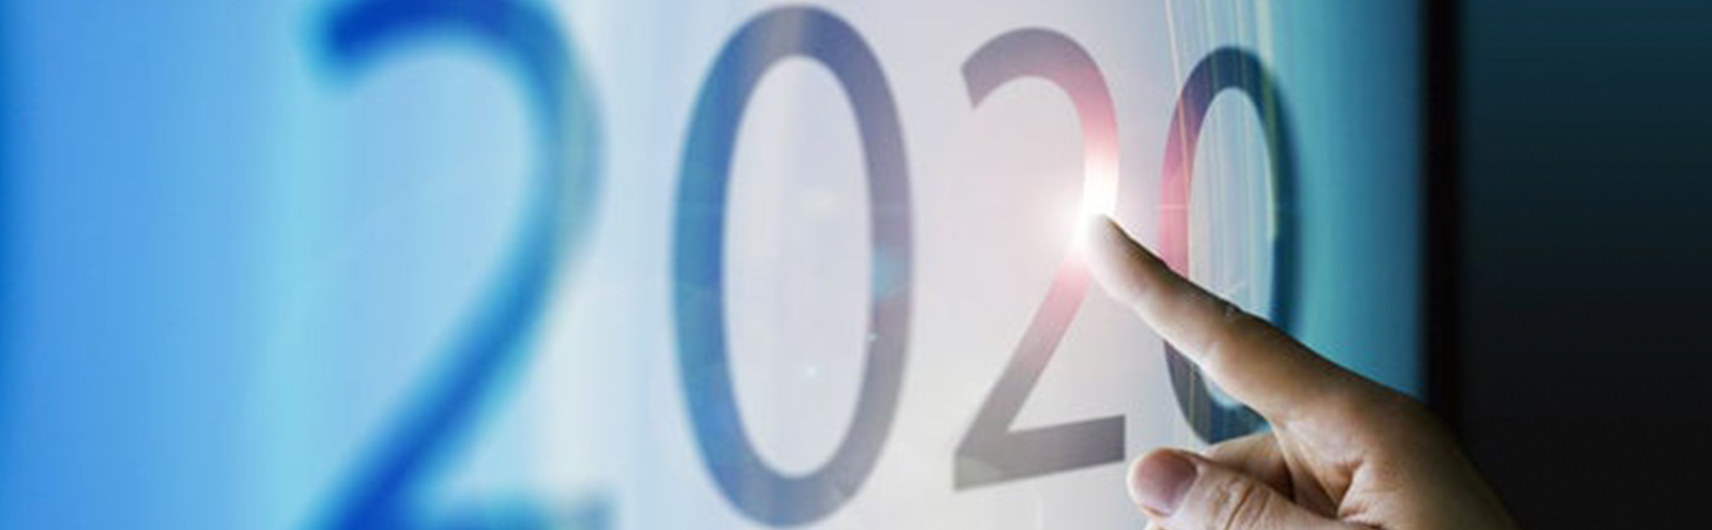 What's New: 2020 Business Plans, Markets, and Trends